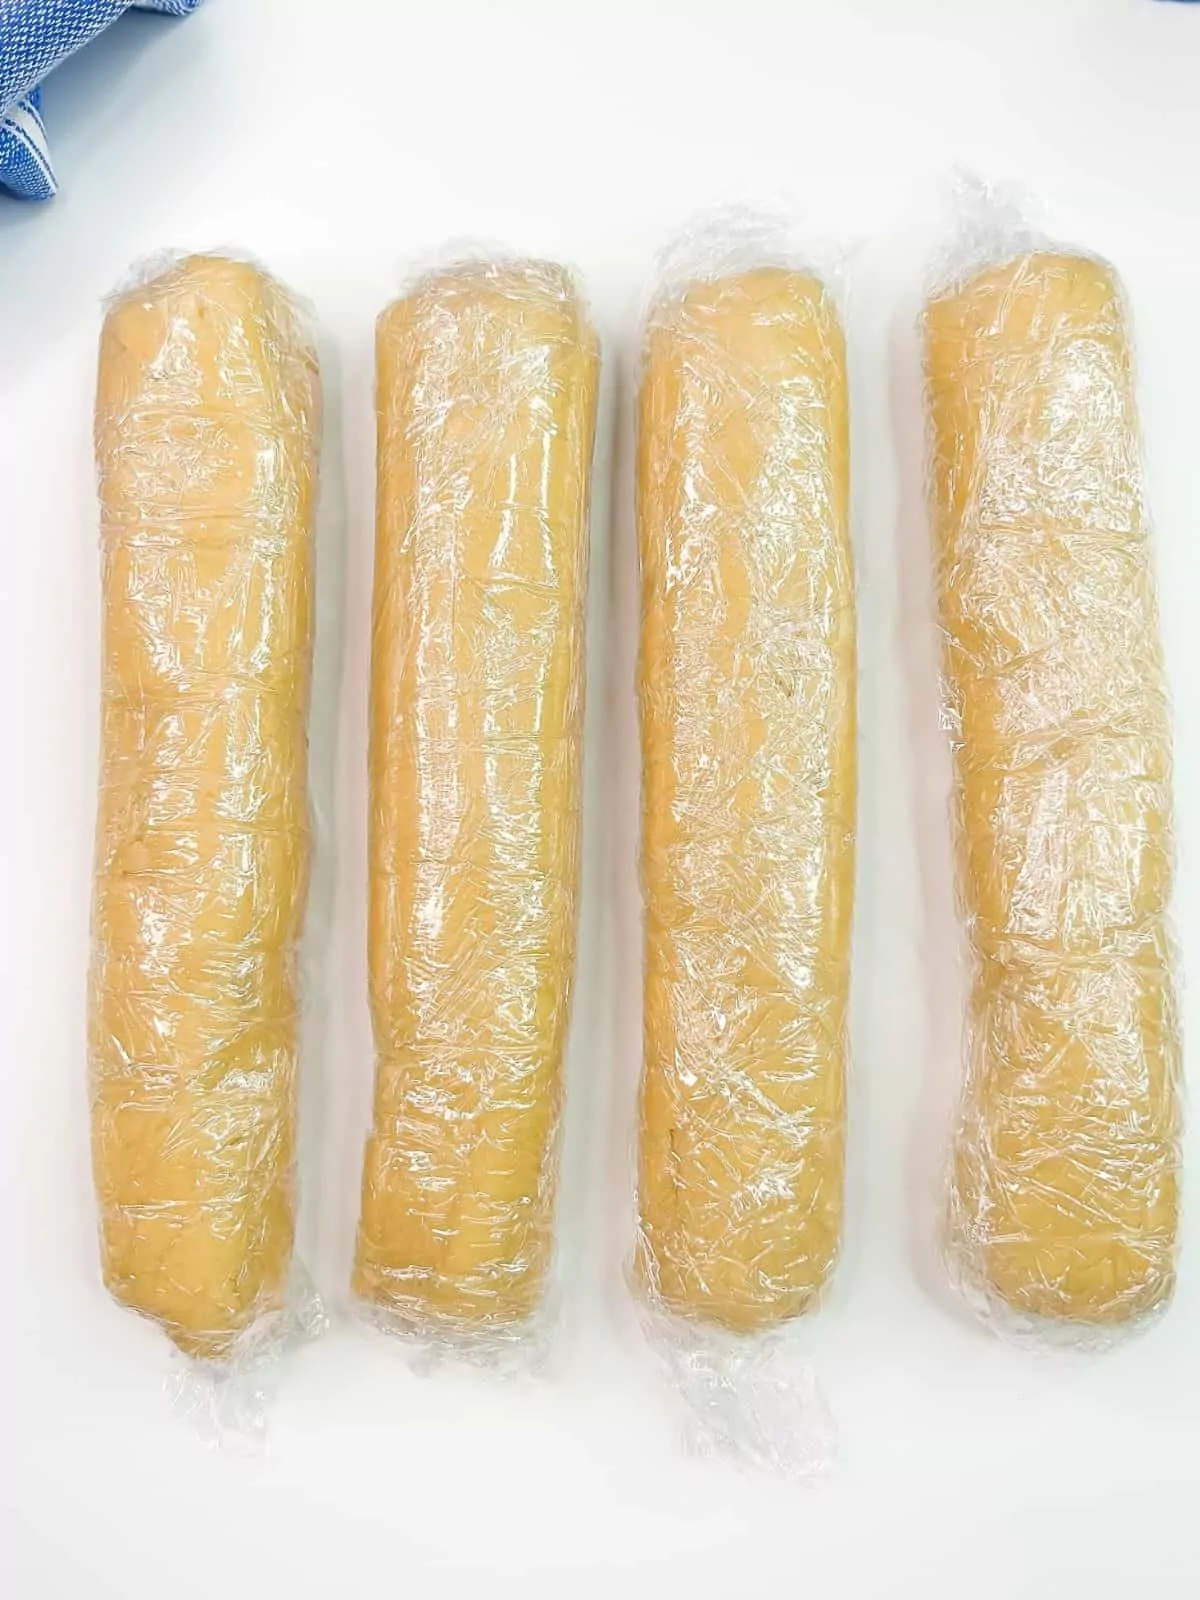 cookie dough logs wrapped in plastic wrap.